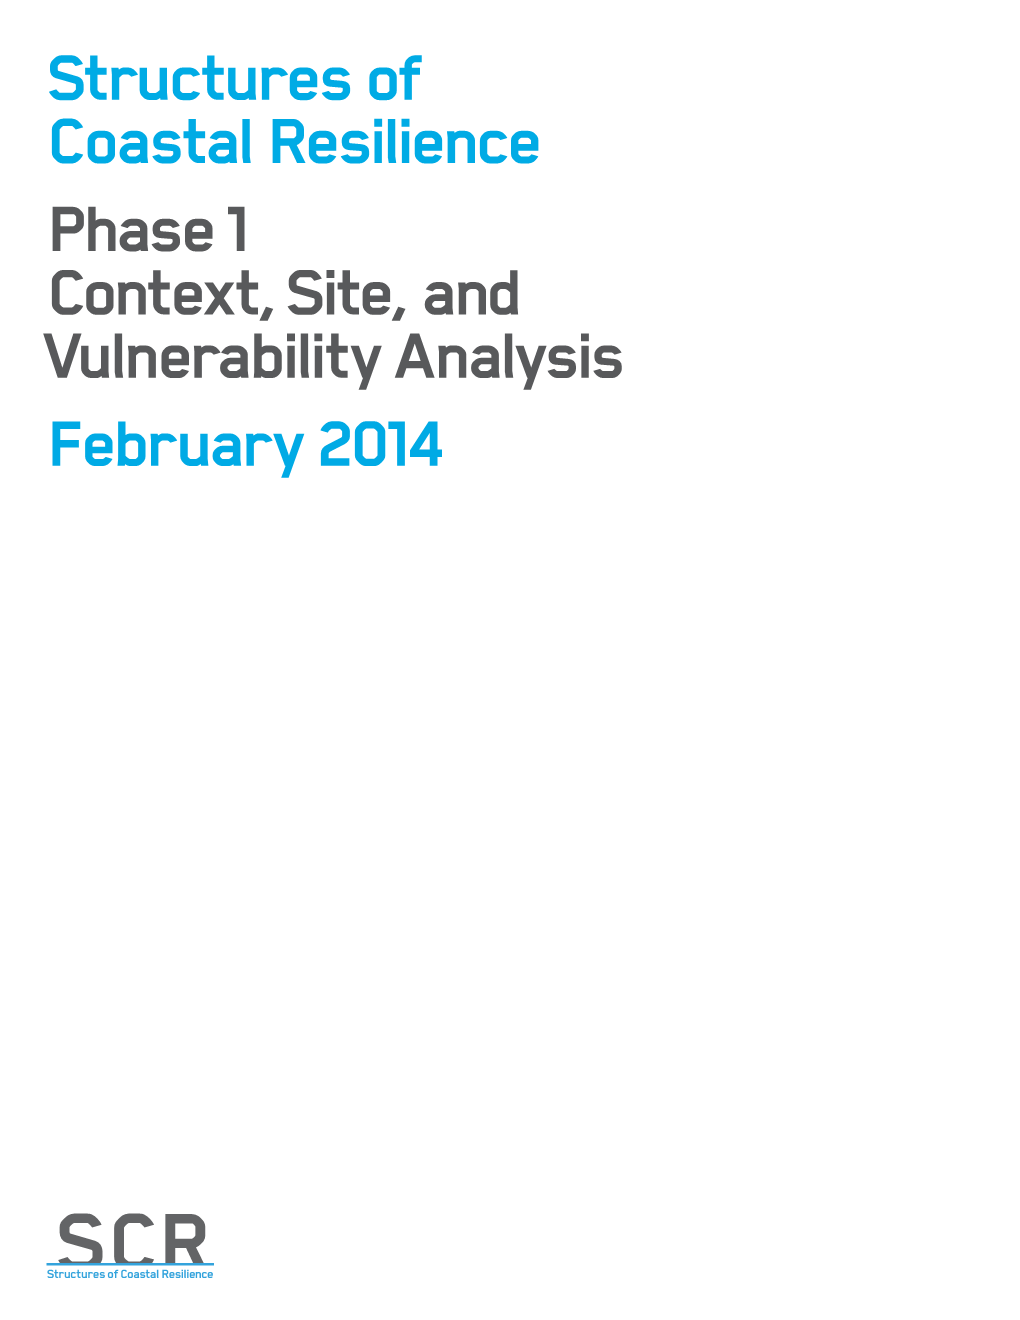 Structures of Coastal Resilience Phase 1 Context, Site, and Vulnerability Analysis February 2014